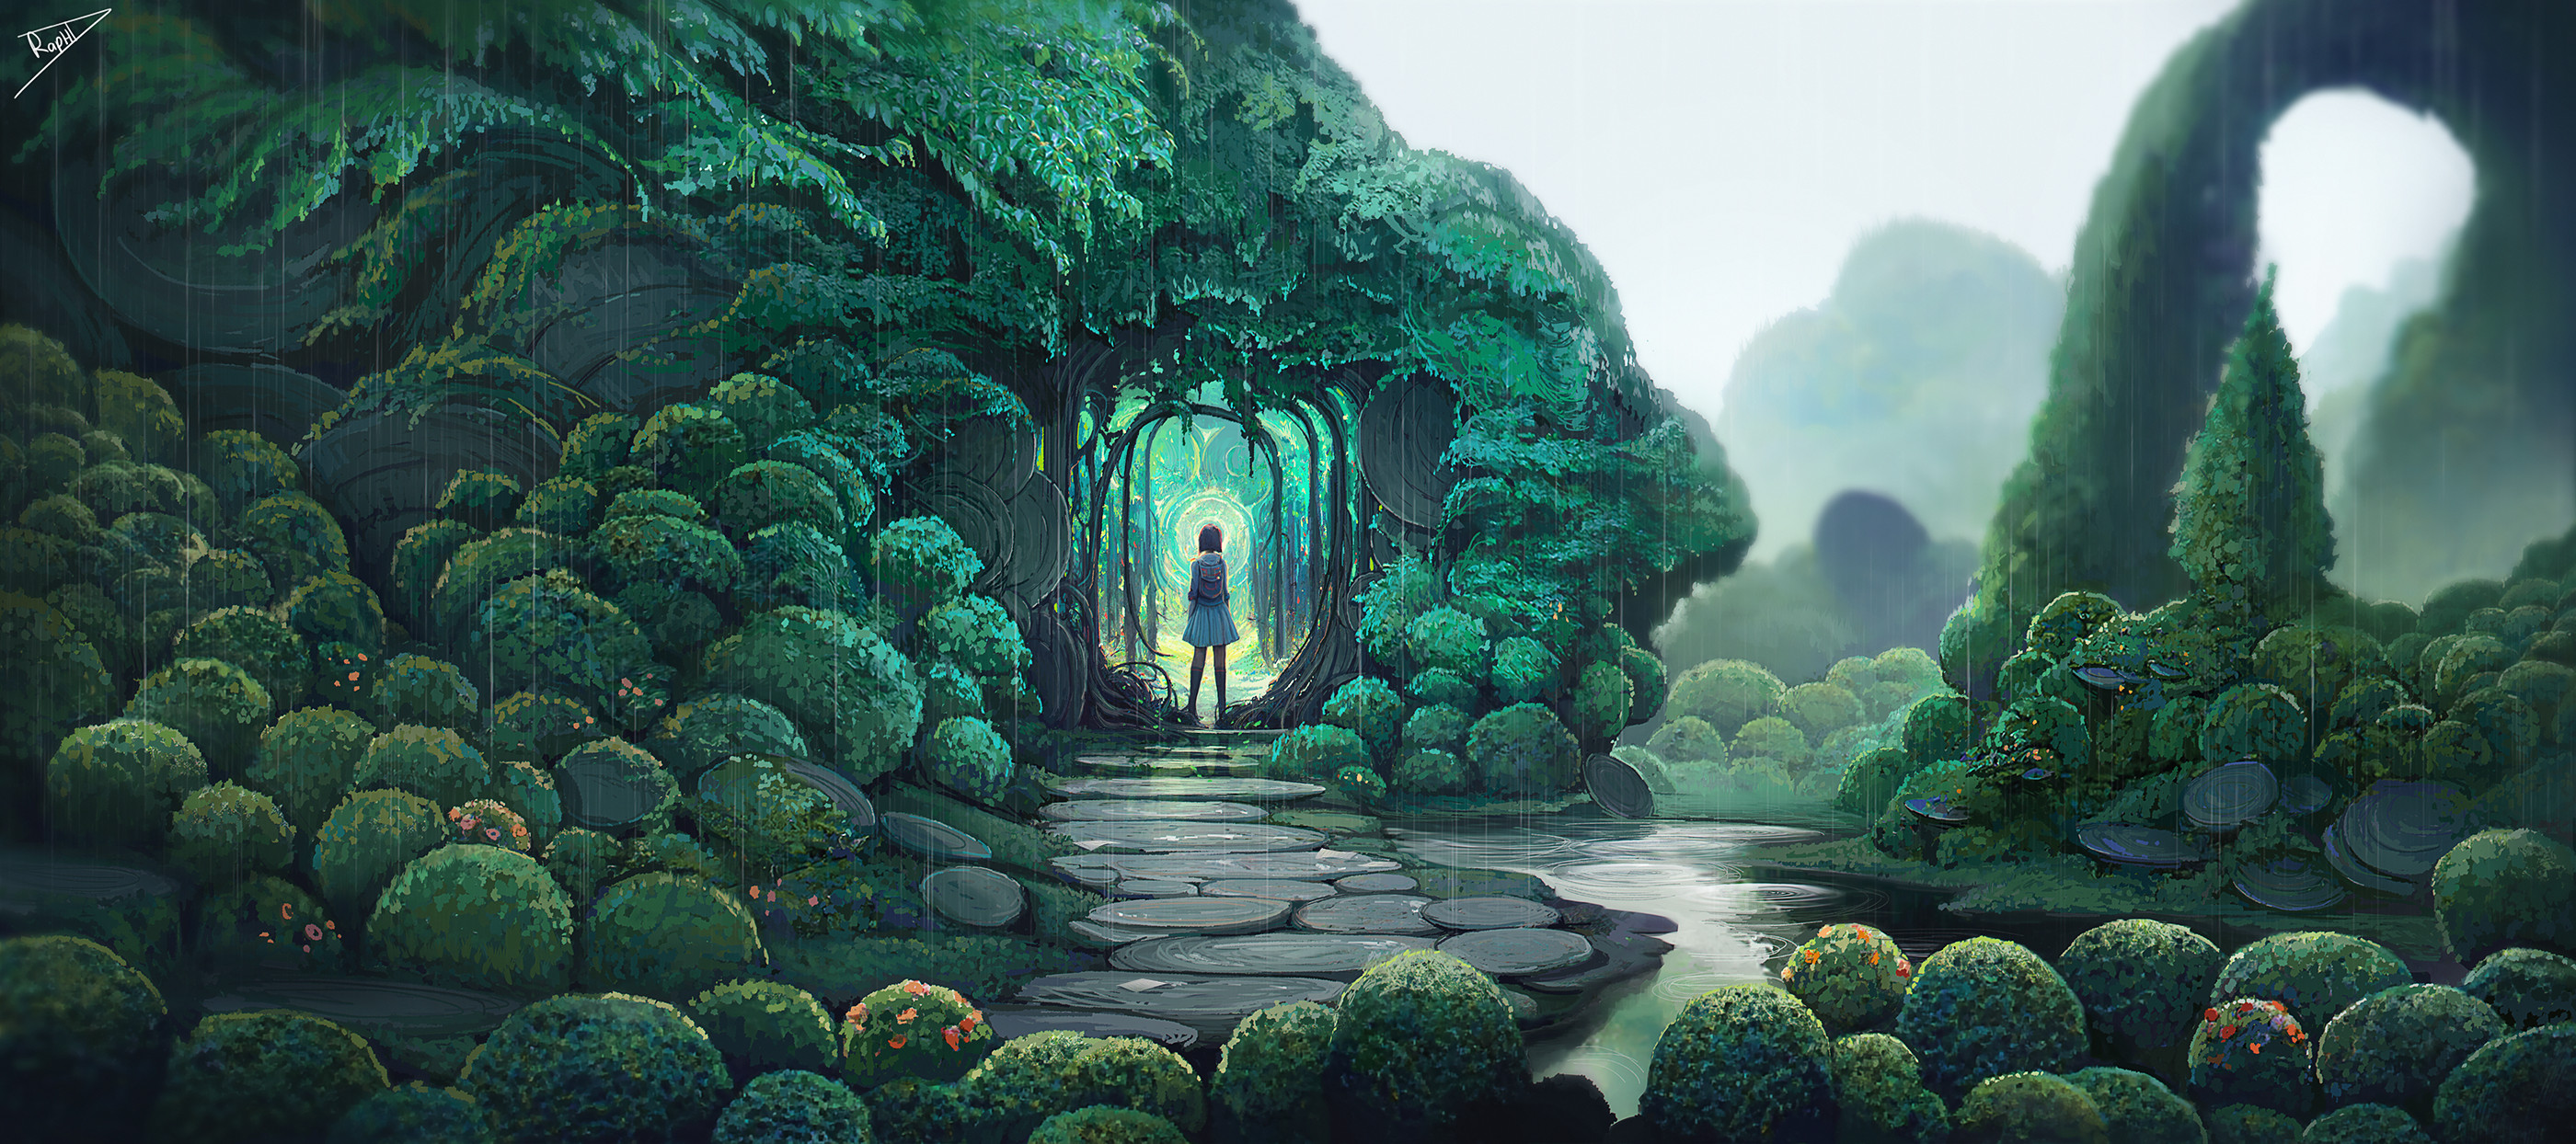 Enchanting HD desktop wallpaper featuring a mystical portal within a lush, green forest pathway, ideal for a magical background theme.